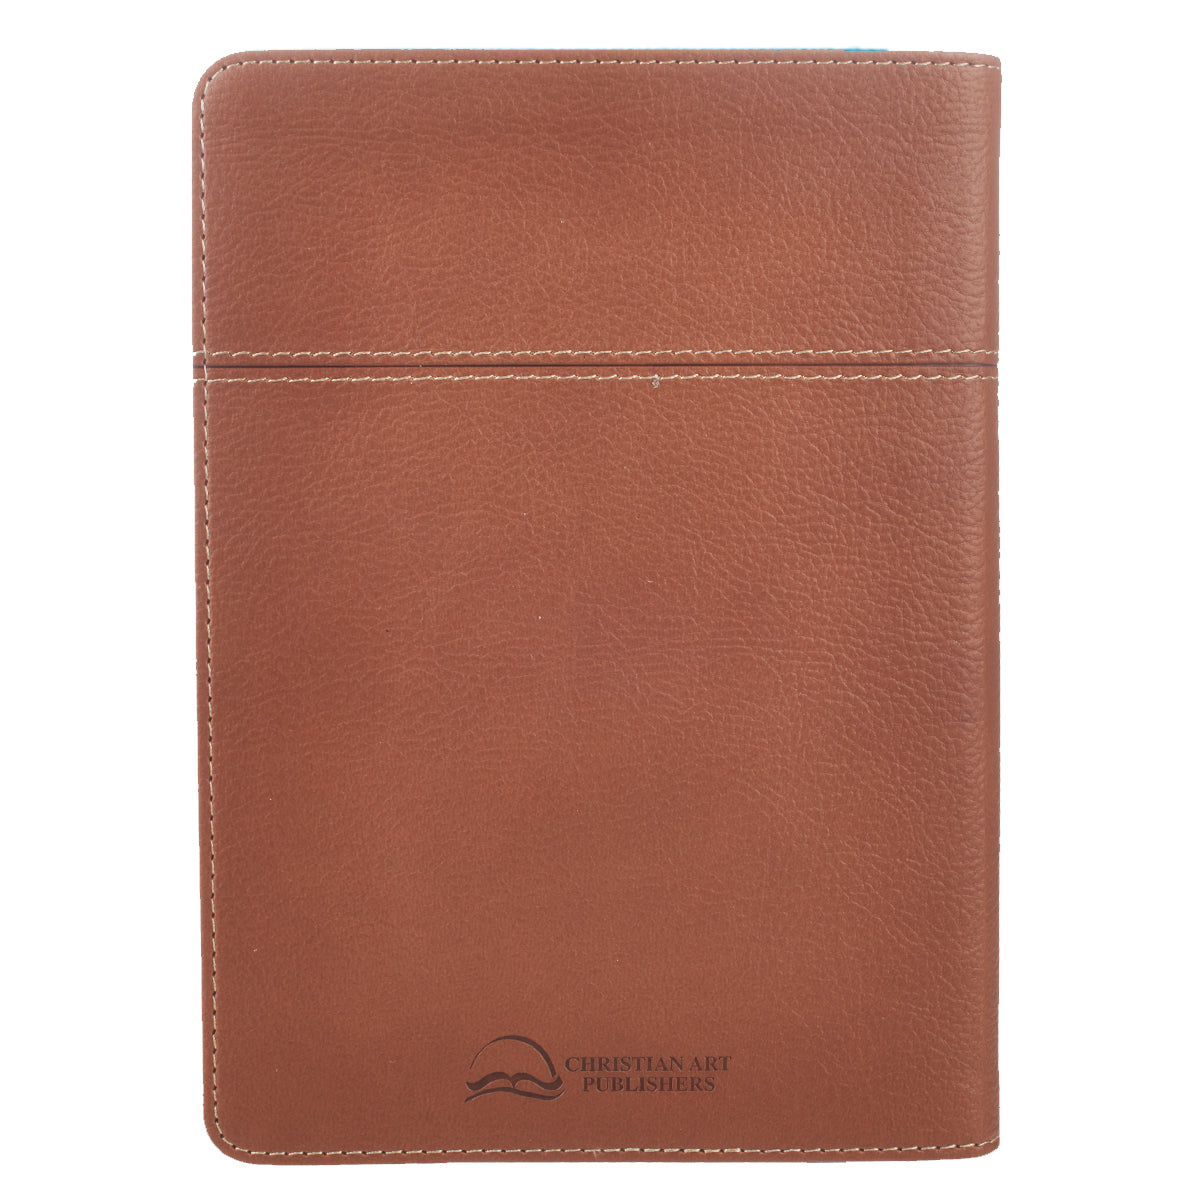 Words of Jesus For Men Saddle Tan Faux Leather Devotional - The Christian Gift Company